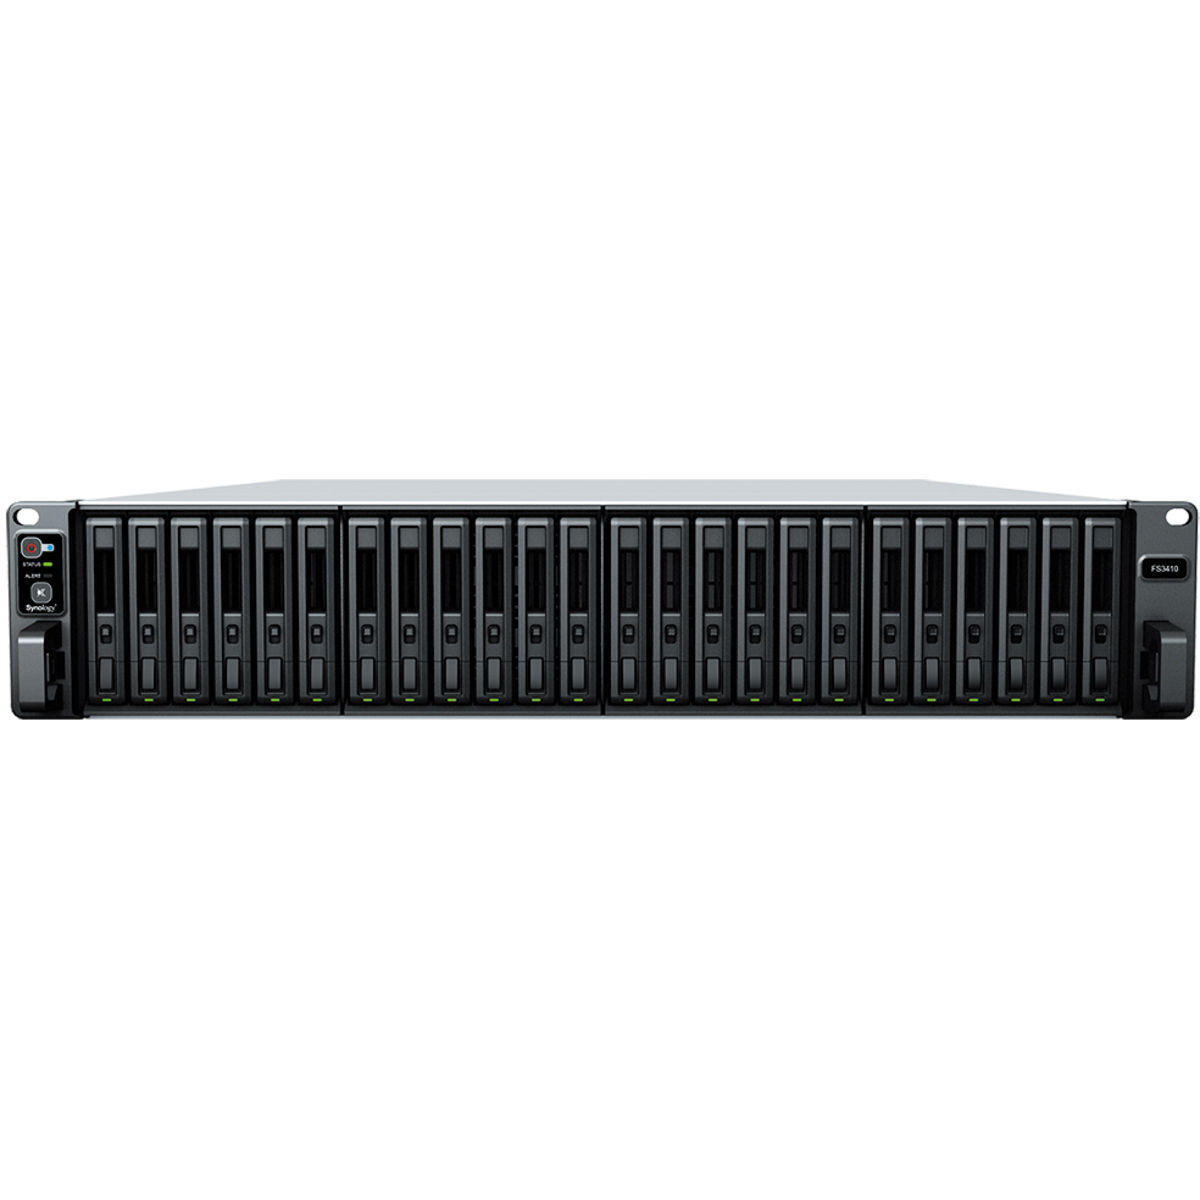 Synology FlashStation FS3410 23tb 24-Bay RackMount Large Business / Enterprise NAS - Network Attached Storage Device 24x960gb Synology SAT5210 Series SAT5210-960G 2.5 530/500MB/s SATA 6Gb/s SSD ENTERPRISE Class Drives Installed - Burn-In Tested FlashStation FS3410